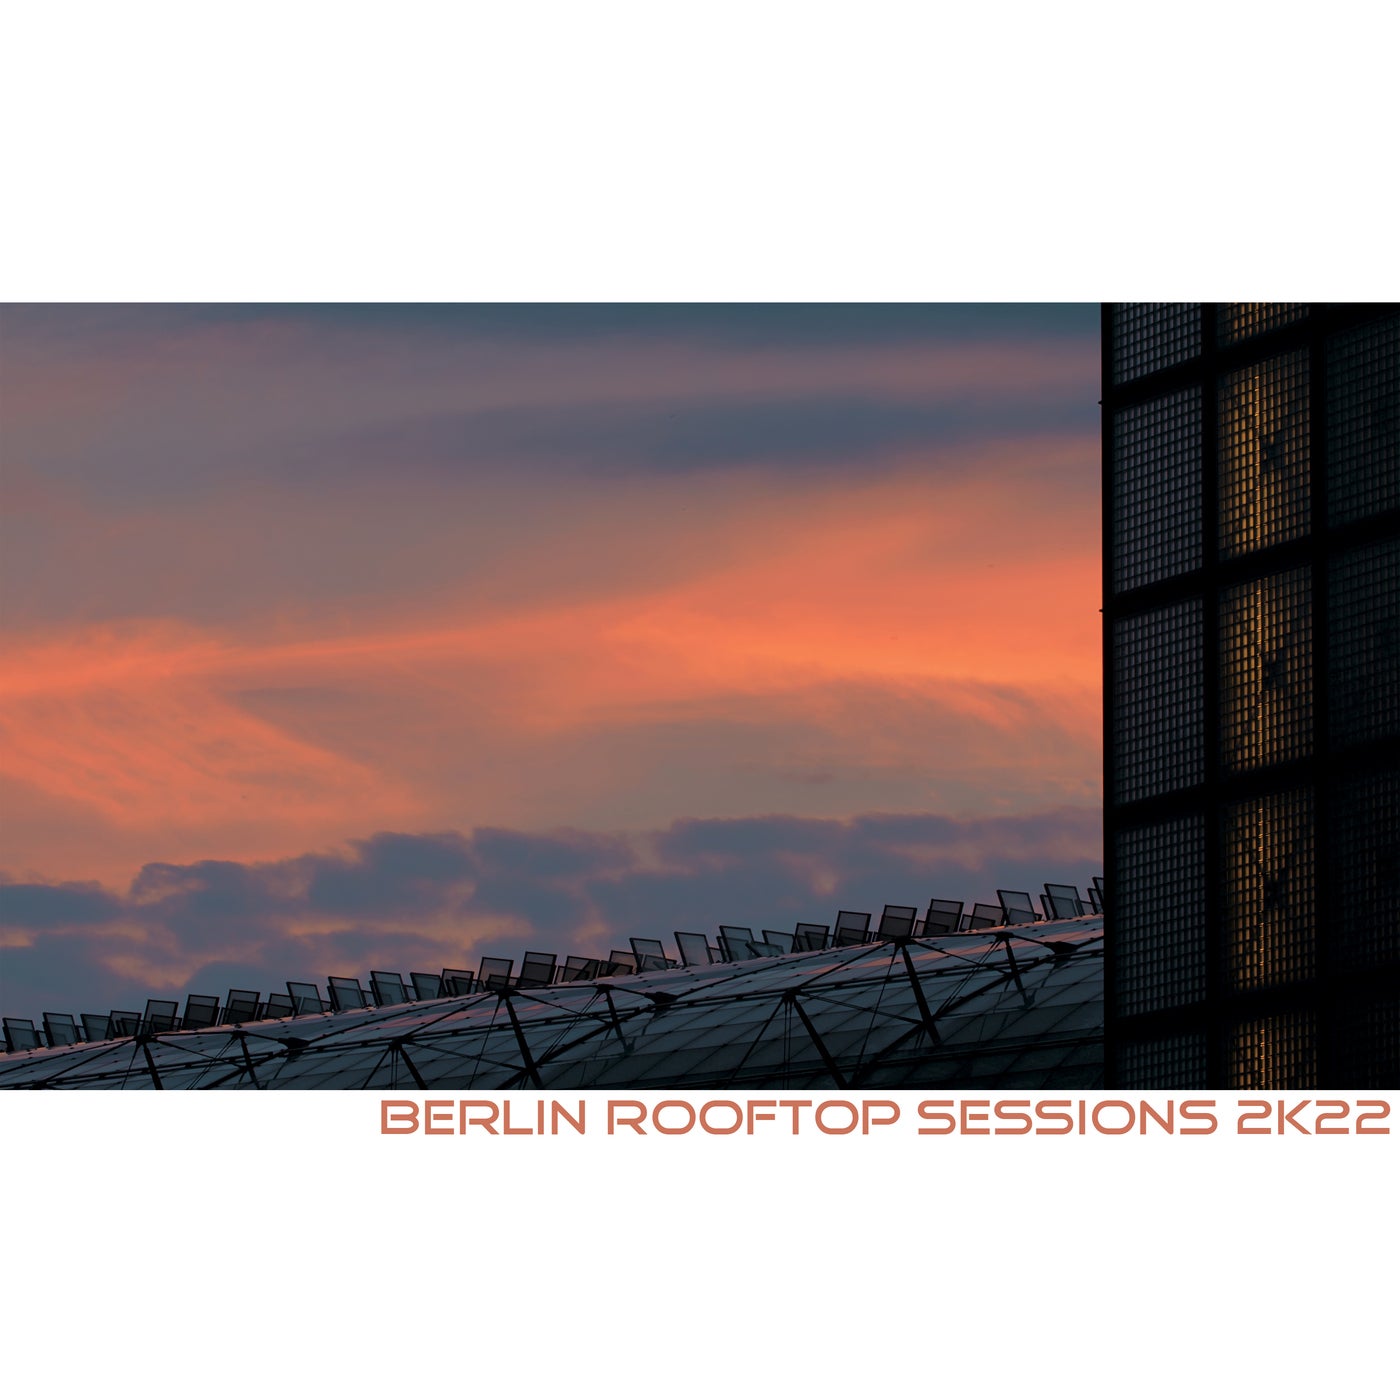 Berlin Rooftop Sessions 2k22